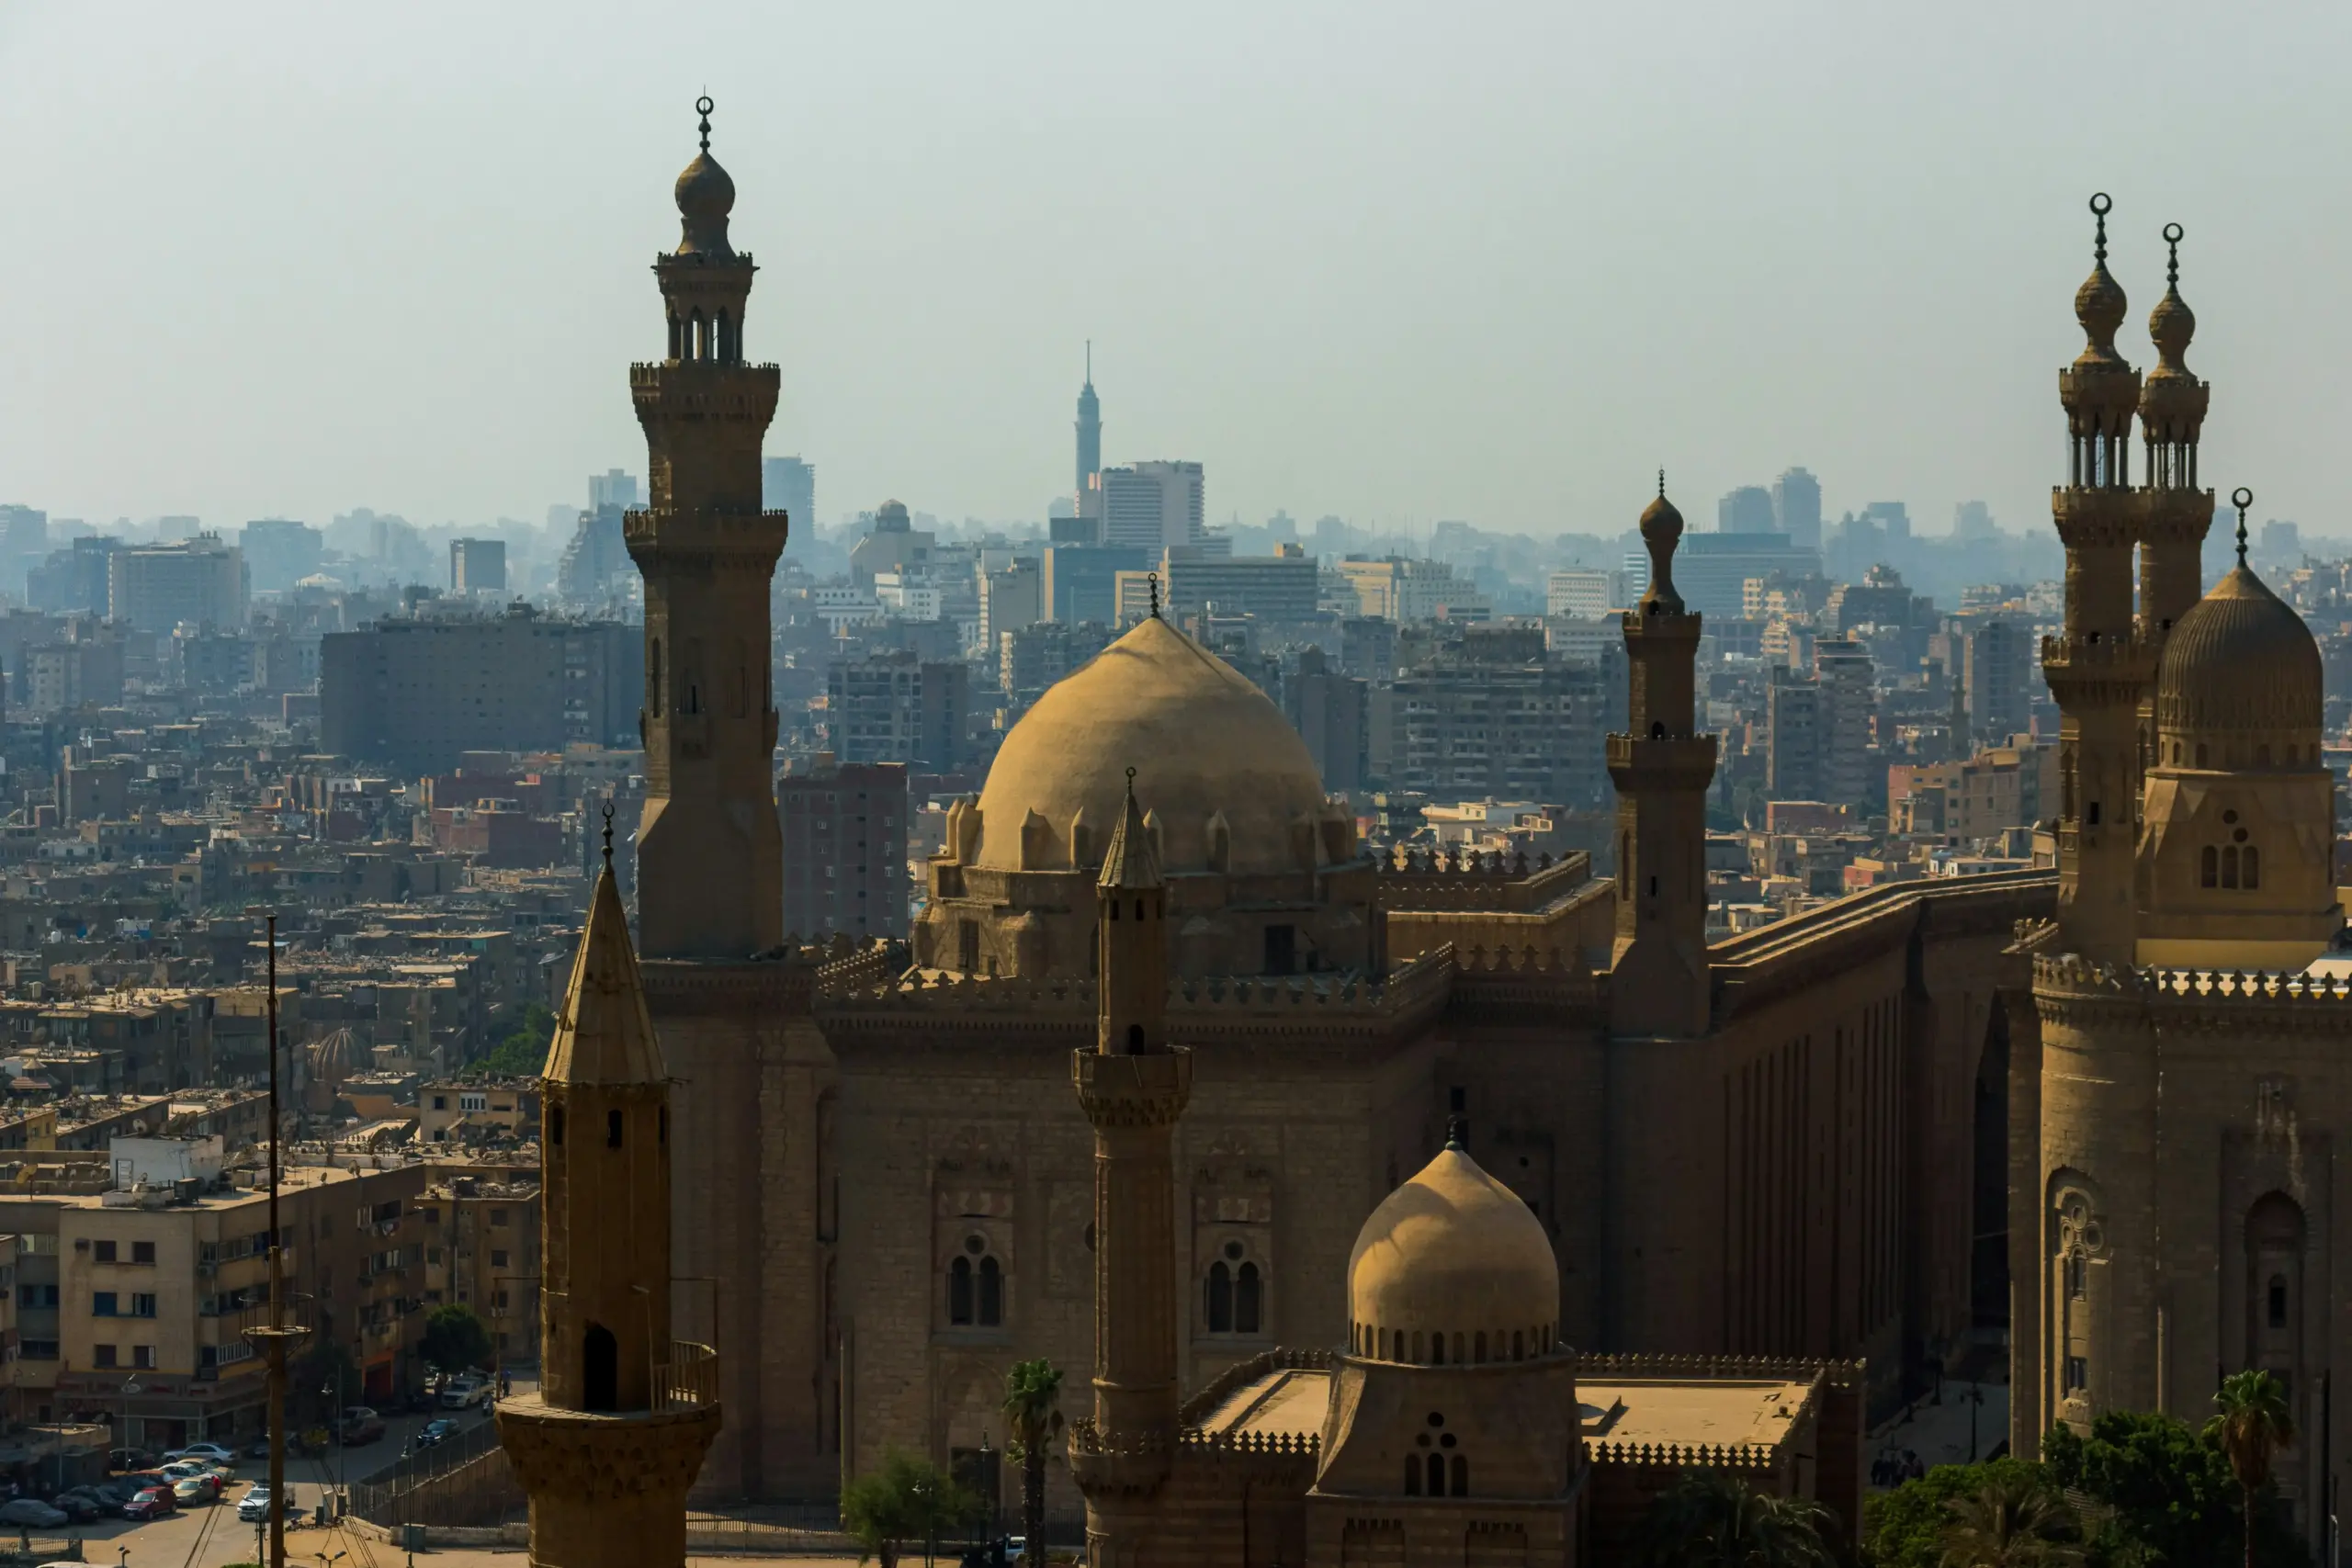 Egypt: Transfer pricing certification - elevating expertise in international taxation | Meet our community